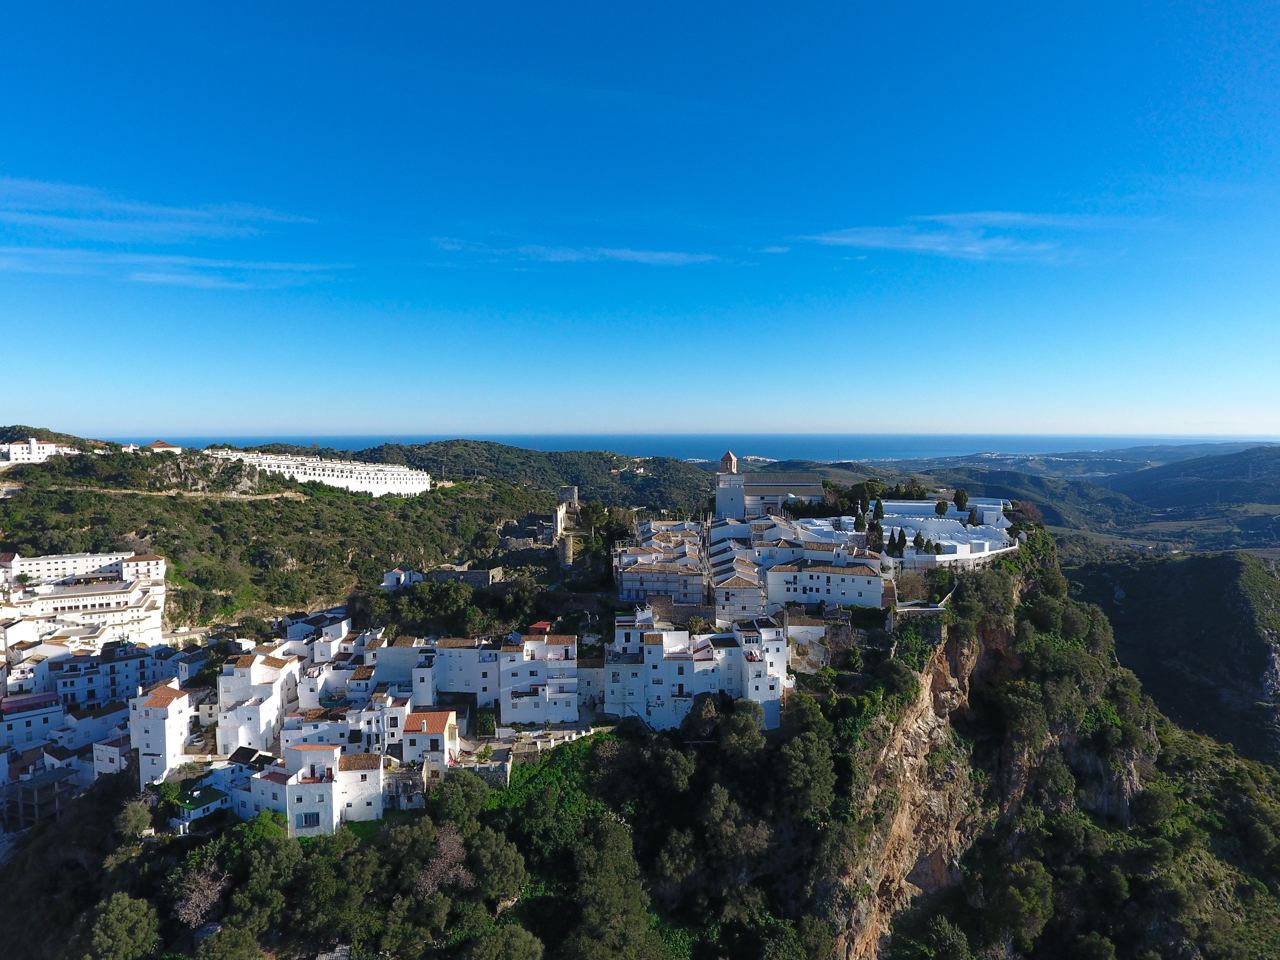 Information about Casares